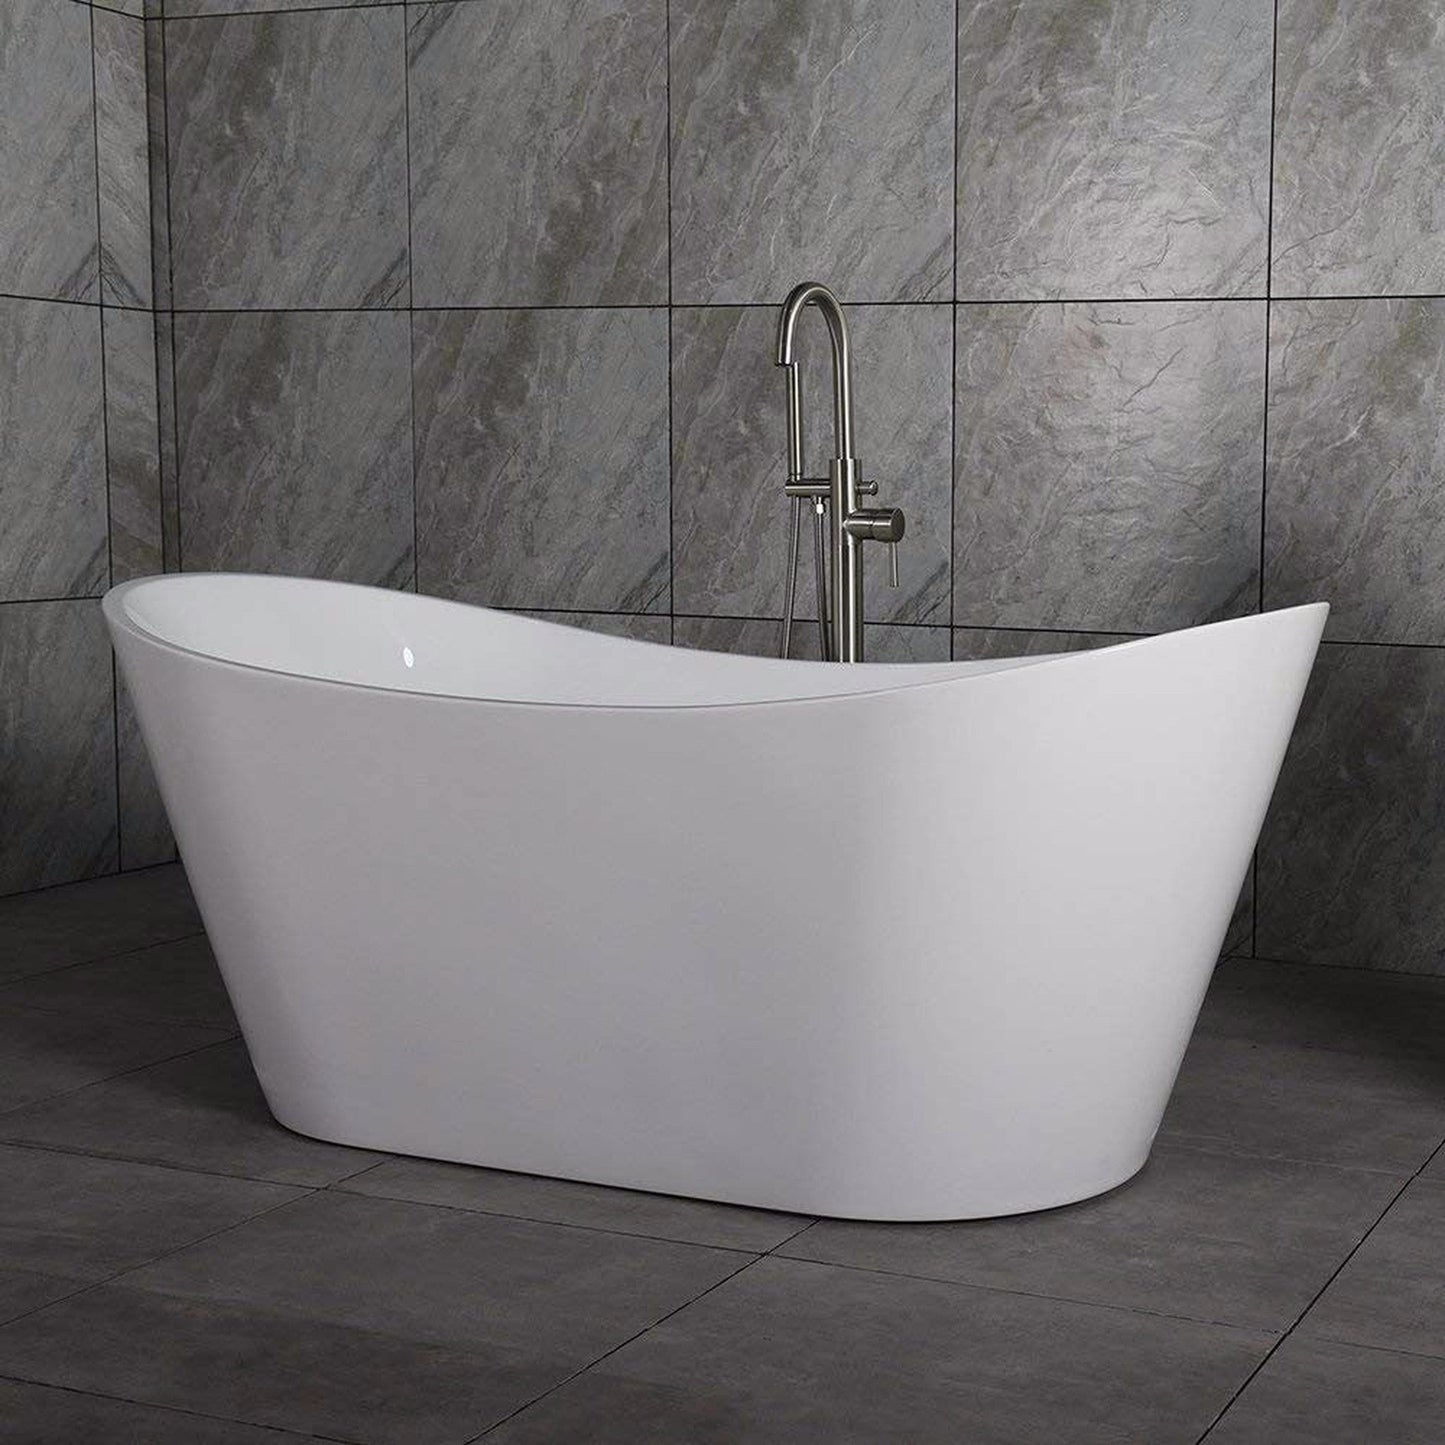 WoodBridge B0010 67" White Acrylic Freestanding Contemporary Soaking Bathtub With Brushed Nickel Drain, Overflow, F-0018BN Tub Filler and Caddy Tray